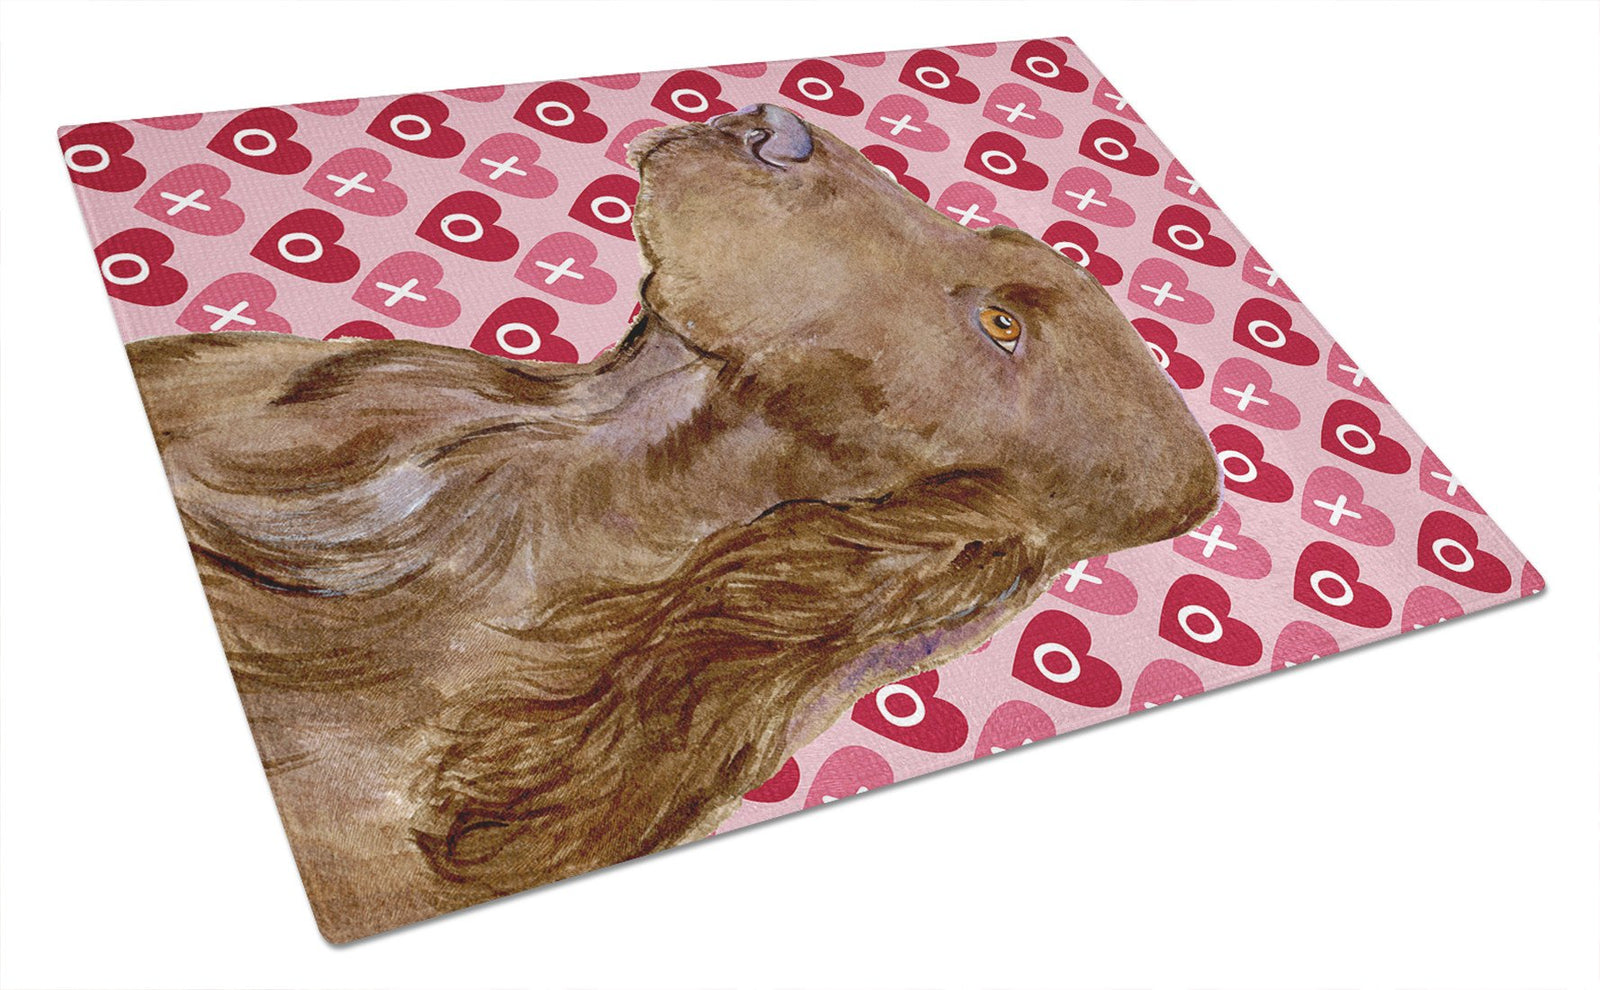 Field Spaniel Hearts Love and Valentine's Day Glass Cutting Board Large by Caroline's Treasures